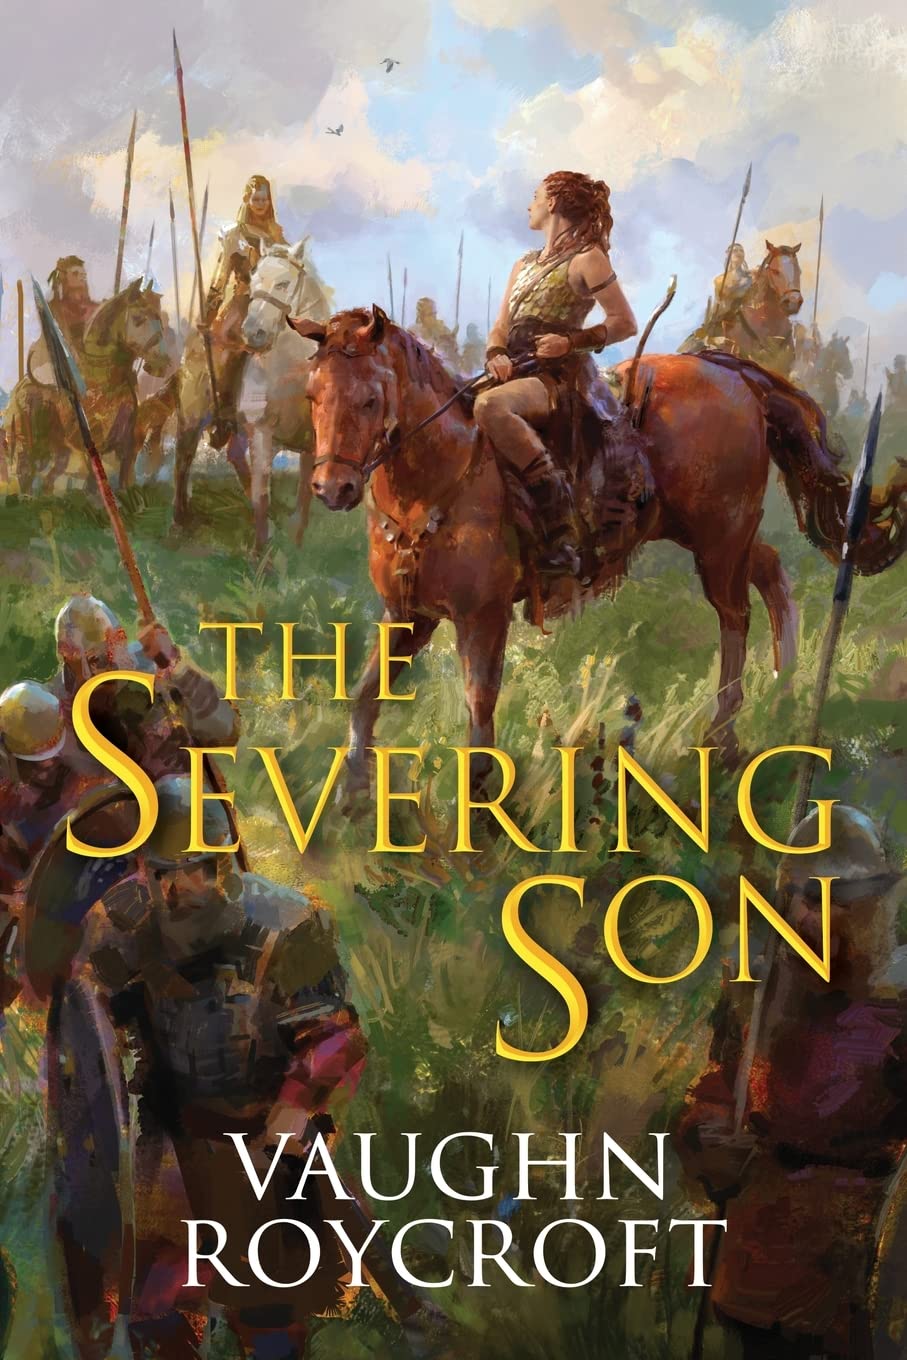 The Severing Son